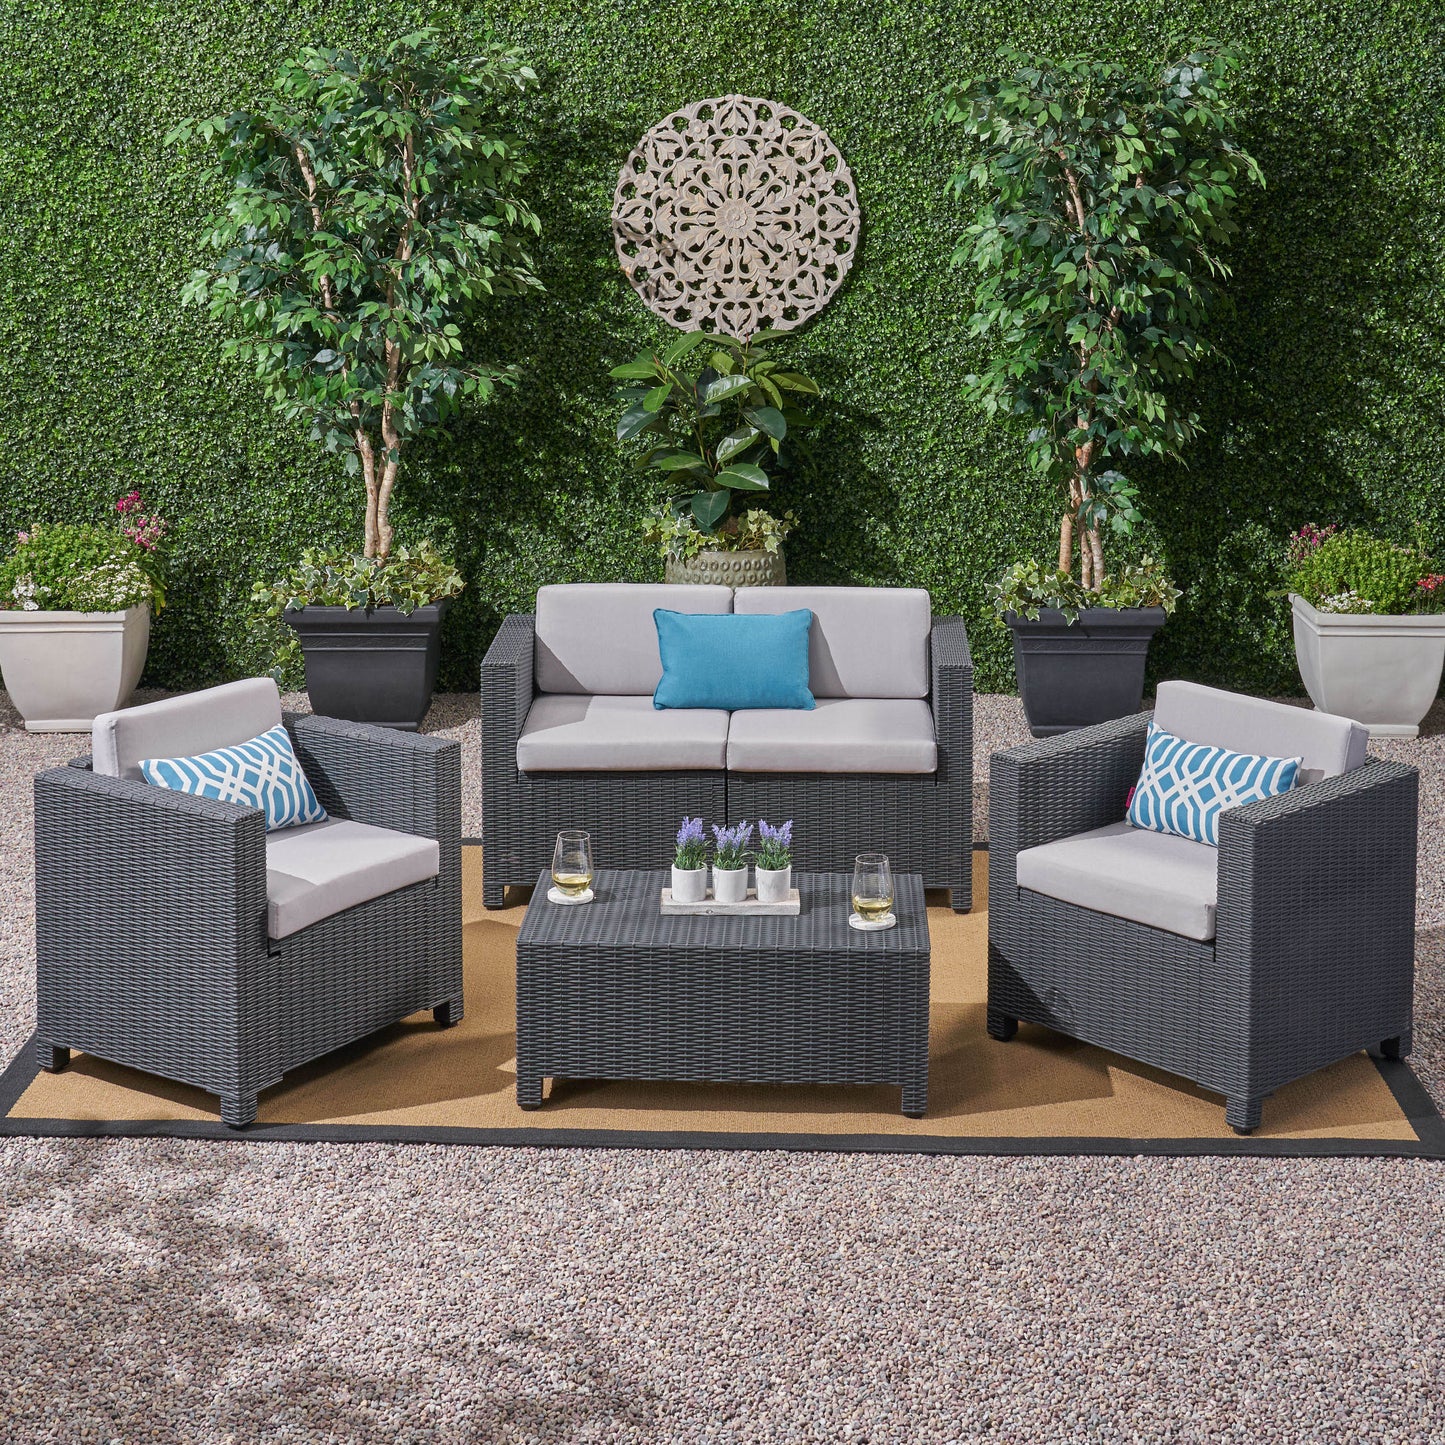 Riley Outdoor All Weather Faux Wicker 4 Seater Chat Set with Cushions